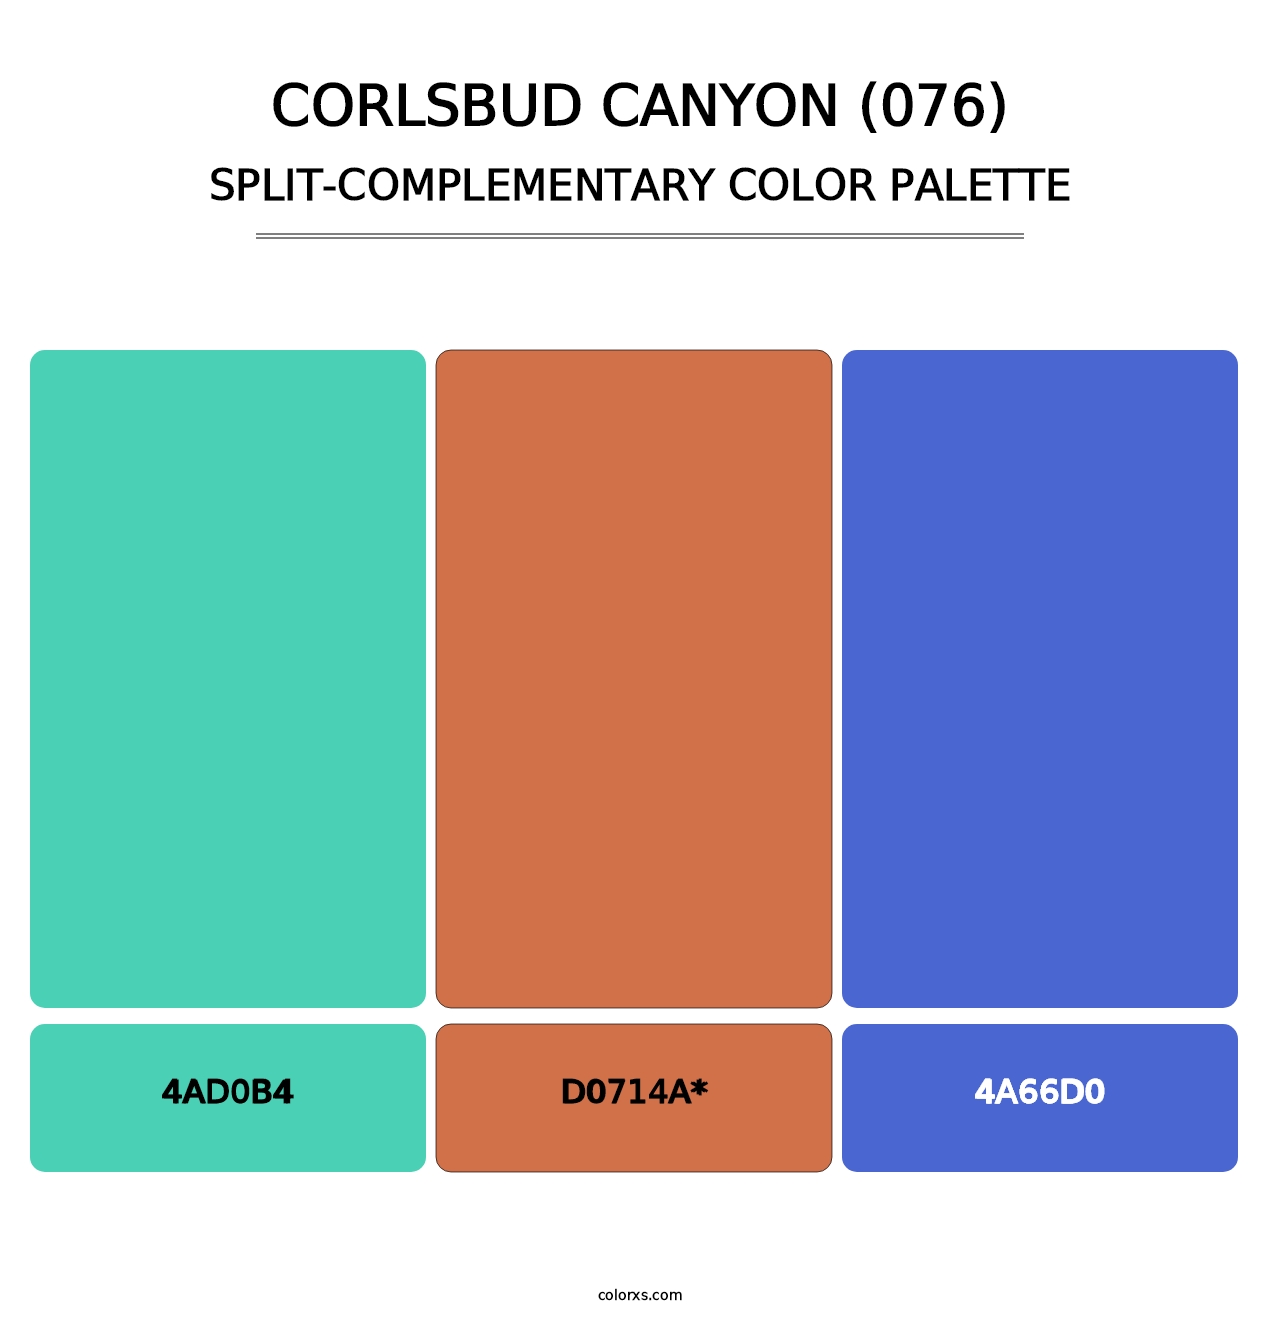 Corlsbud Canyon (076) - Split-Complementary Color Palette